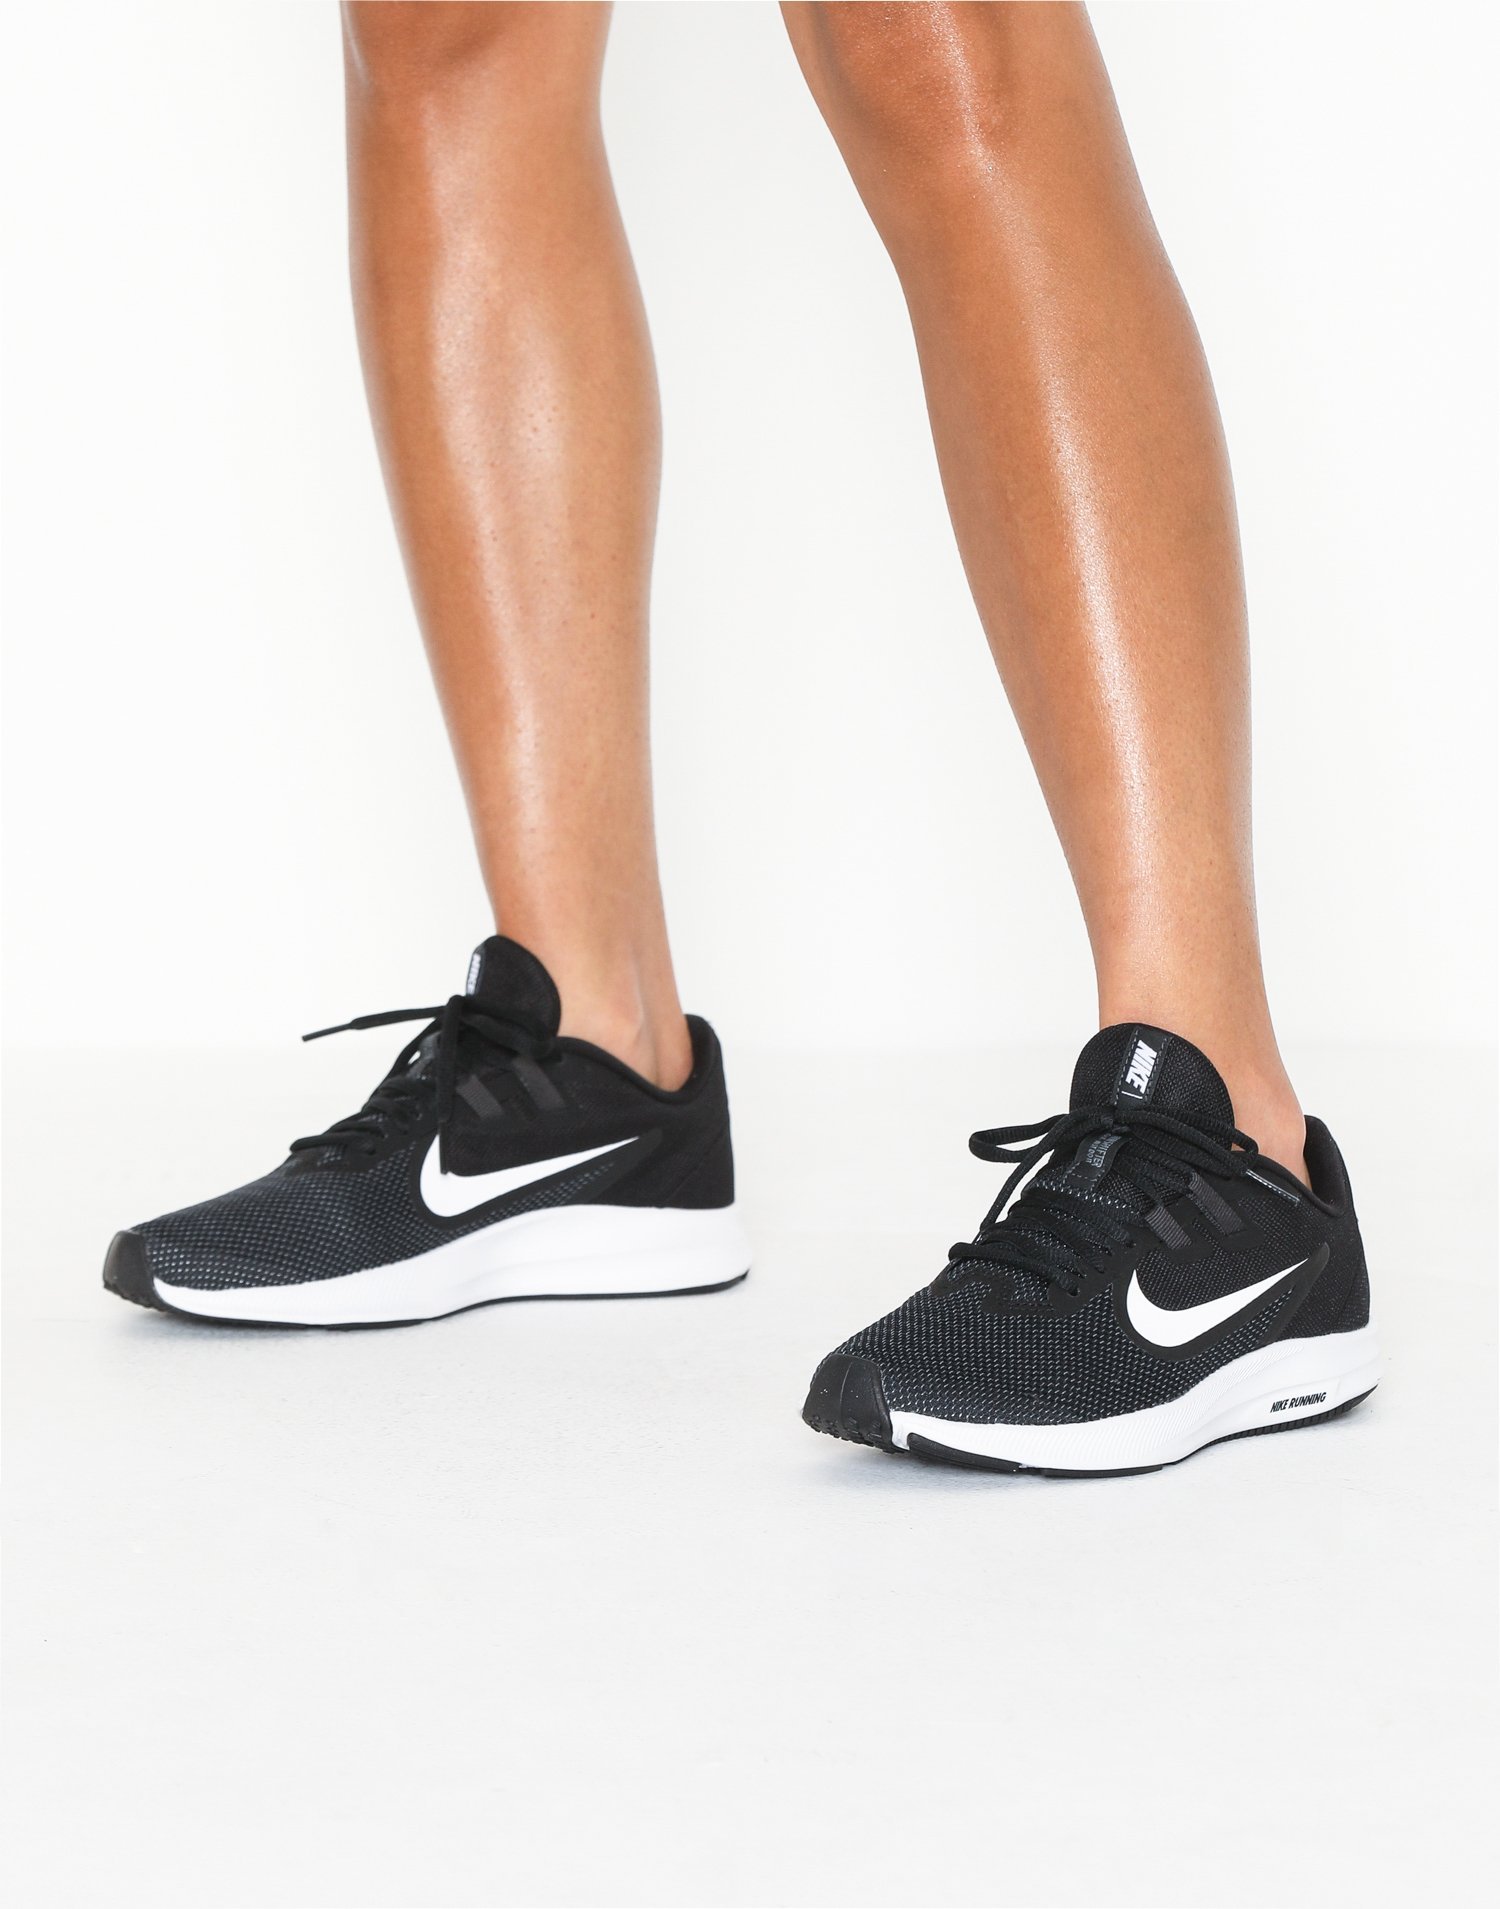 nike downshifter 9 womens review